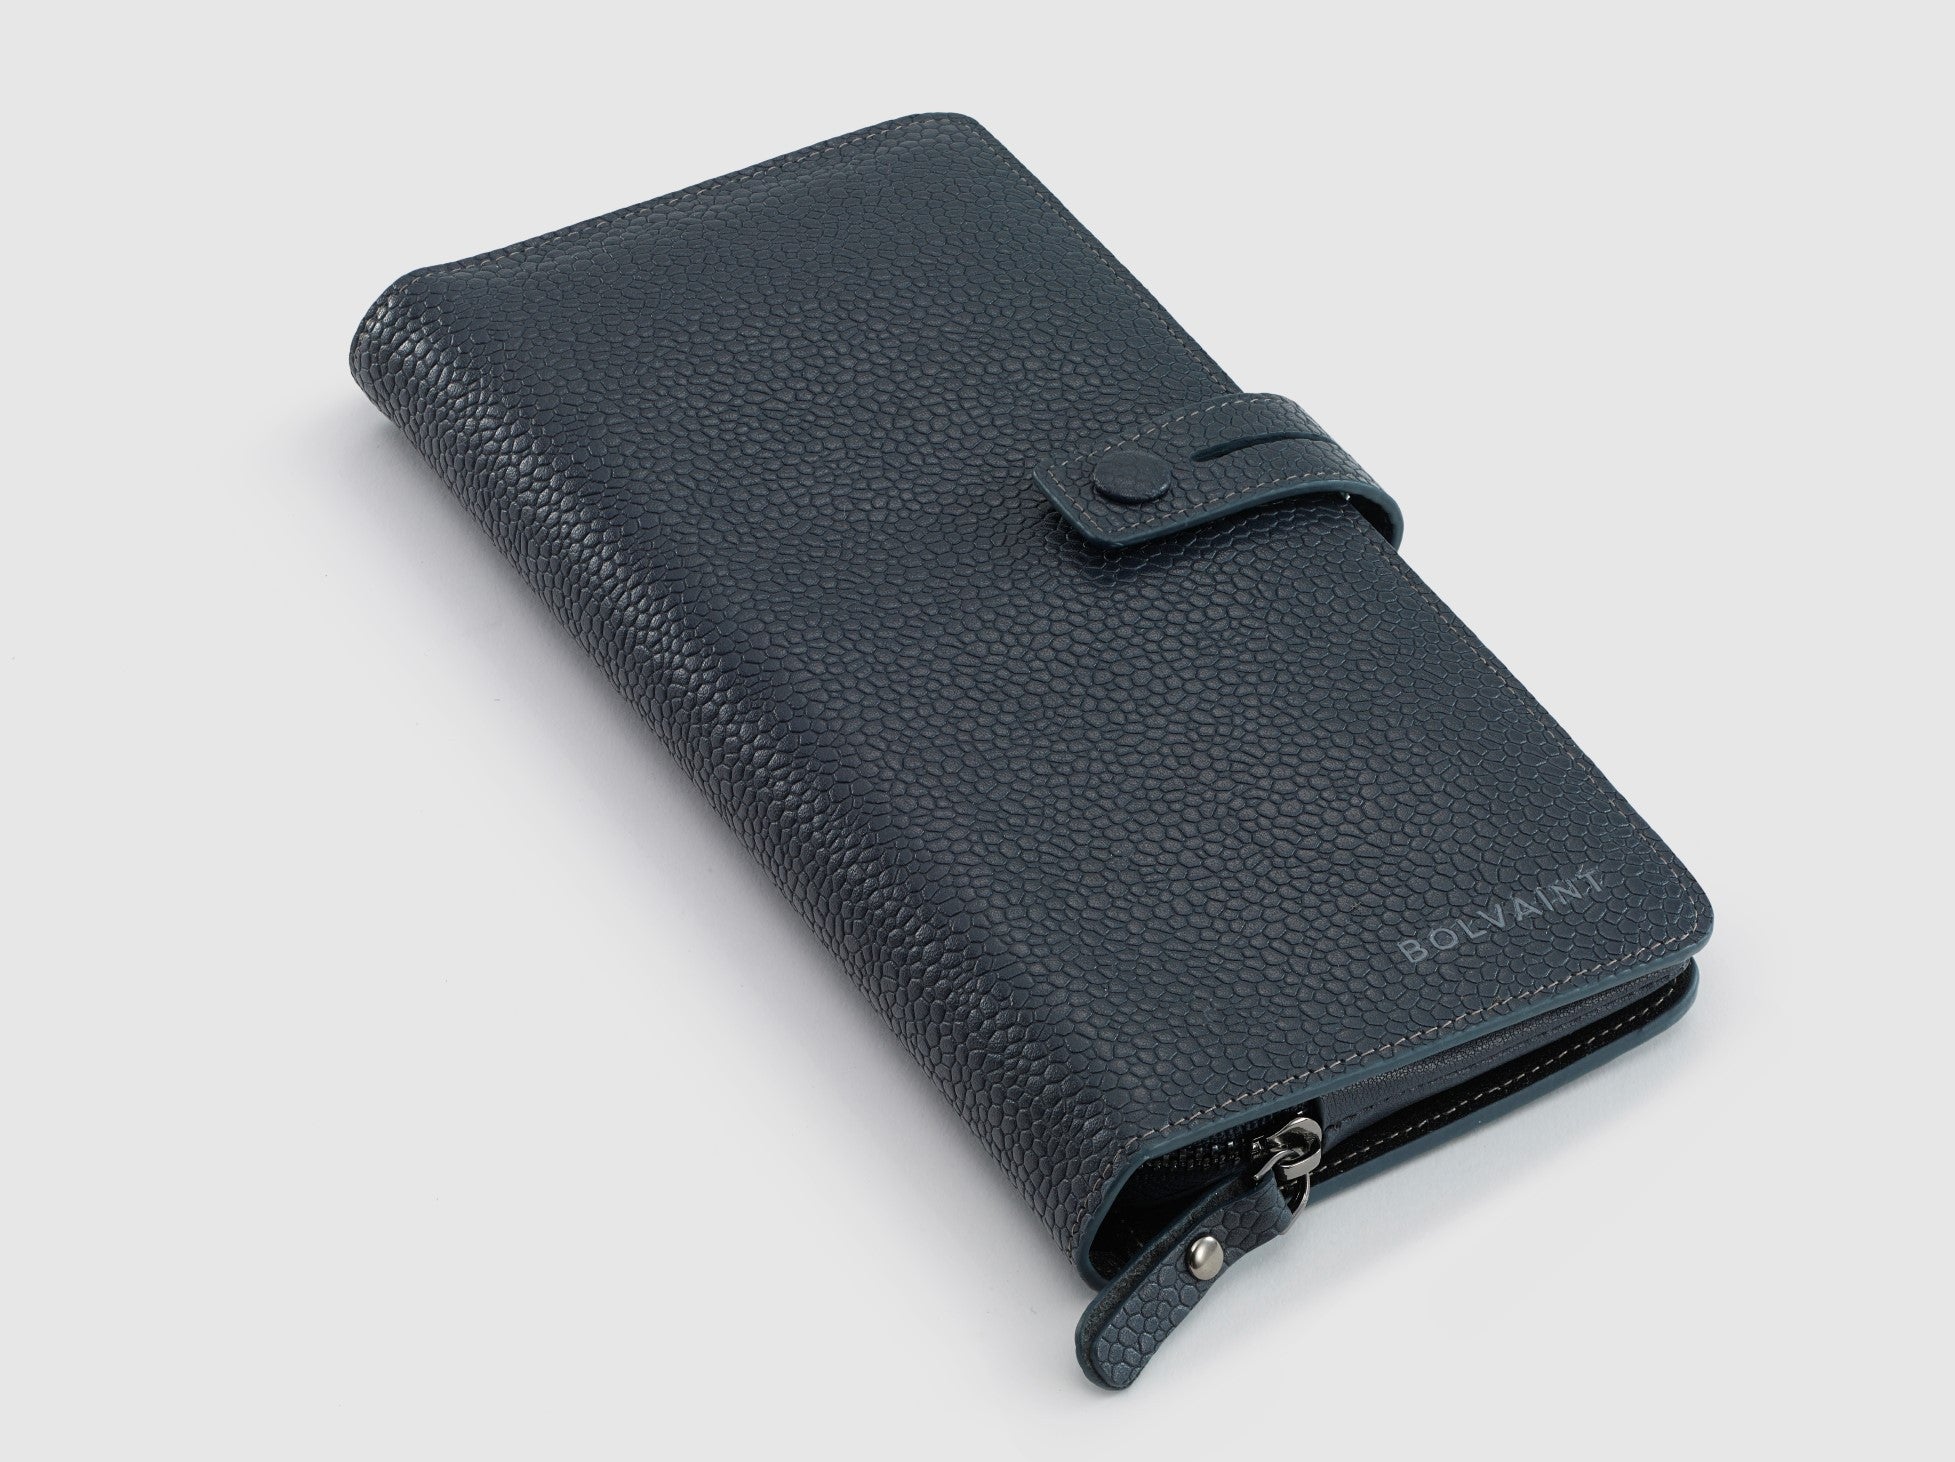 The Thio Travel Wallet